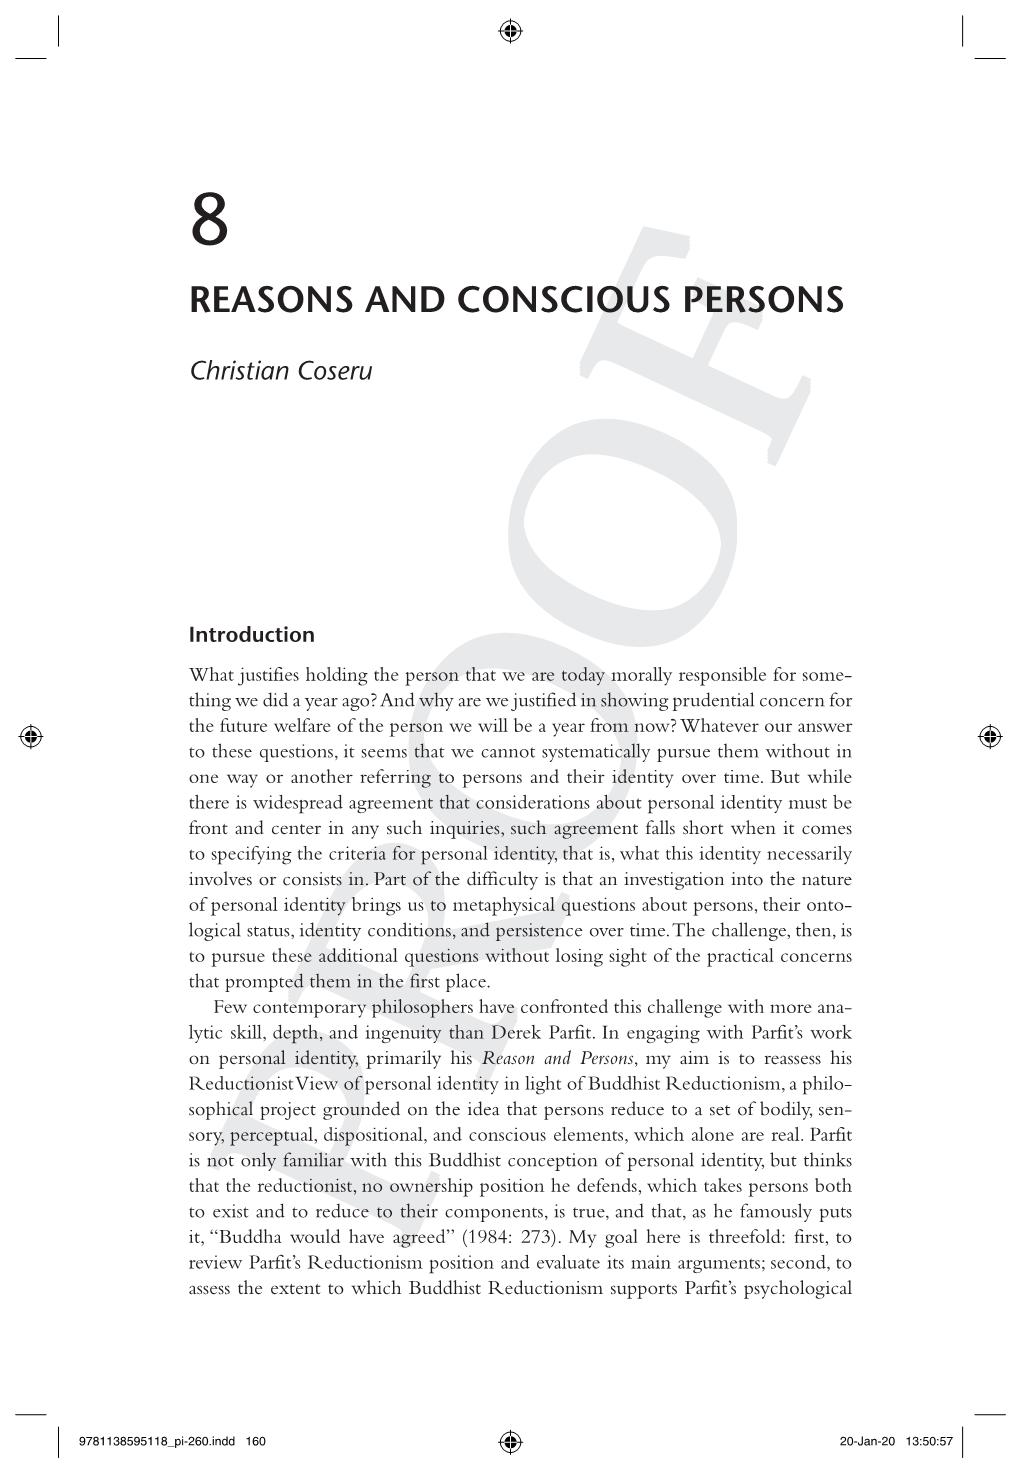 Reasons and Conscious Persons